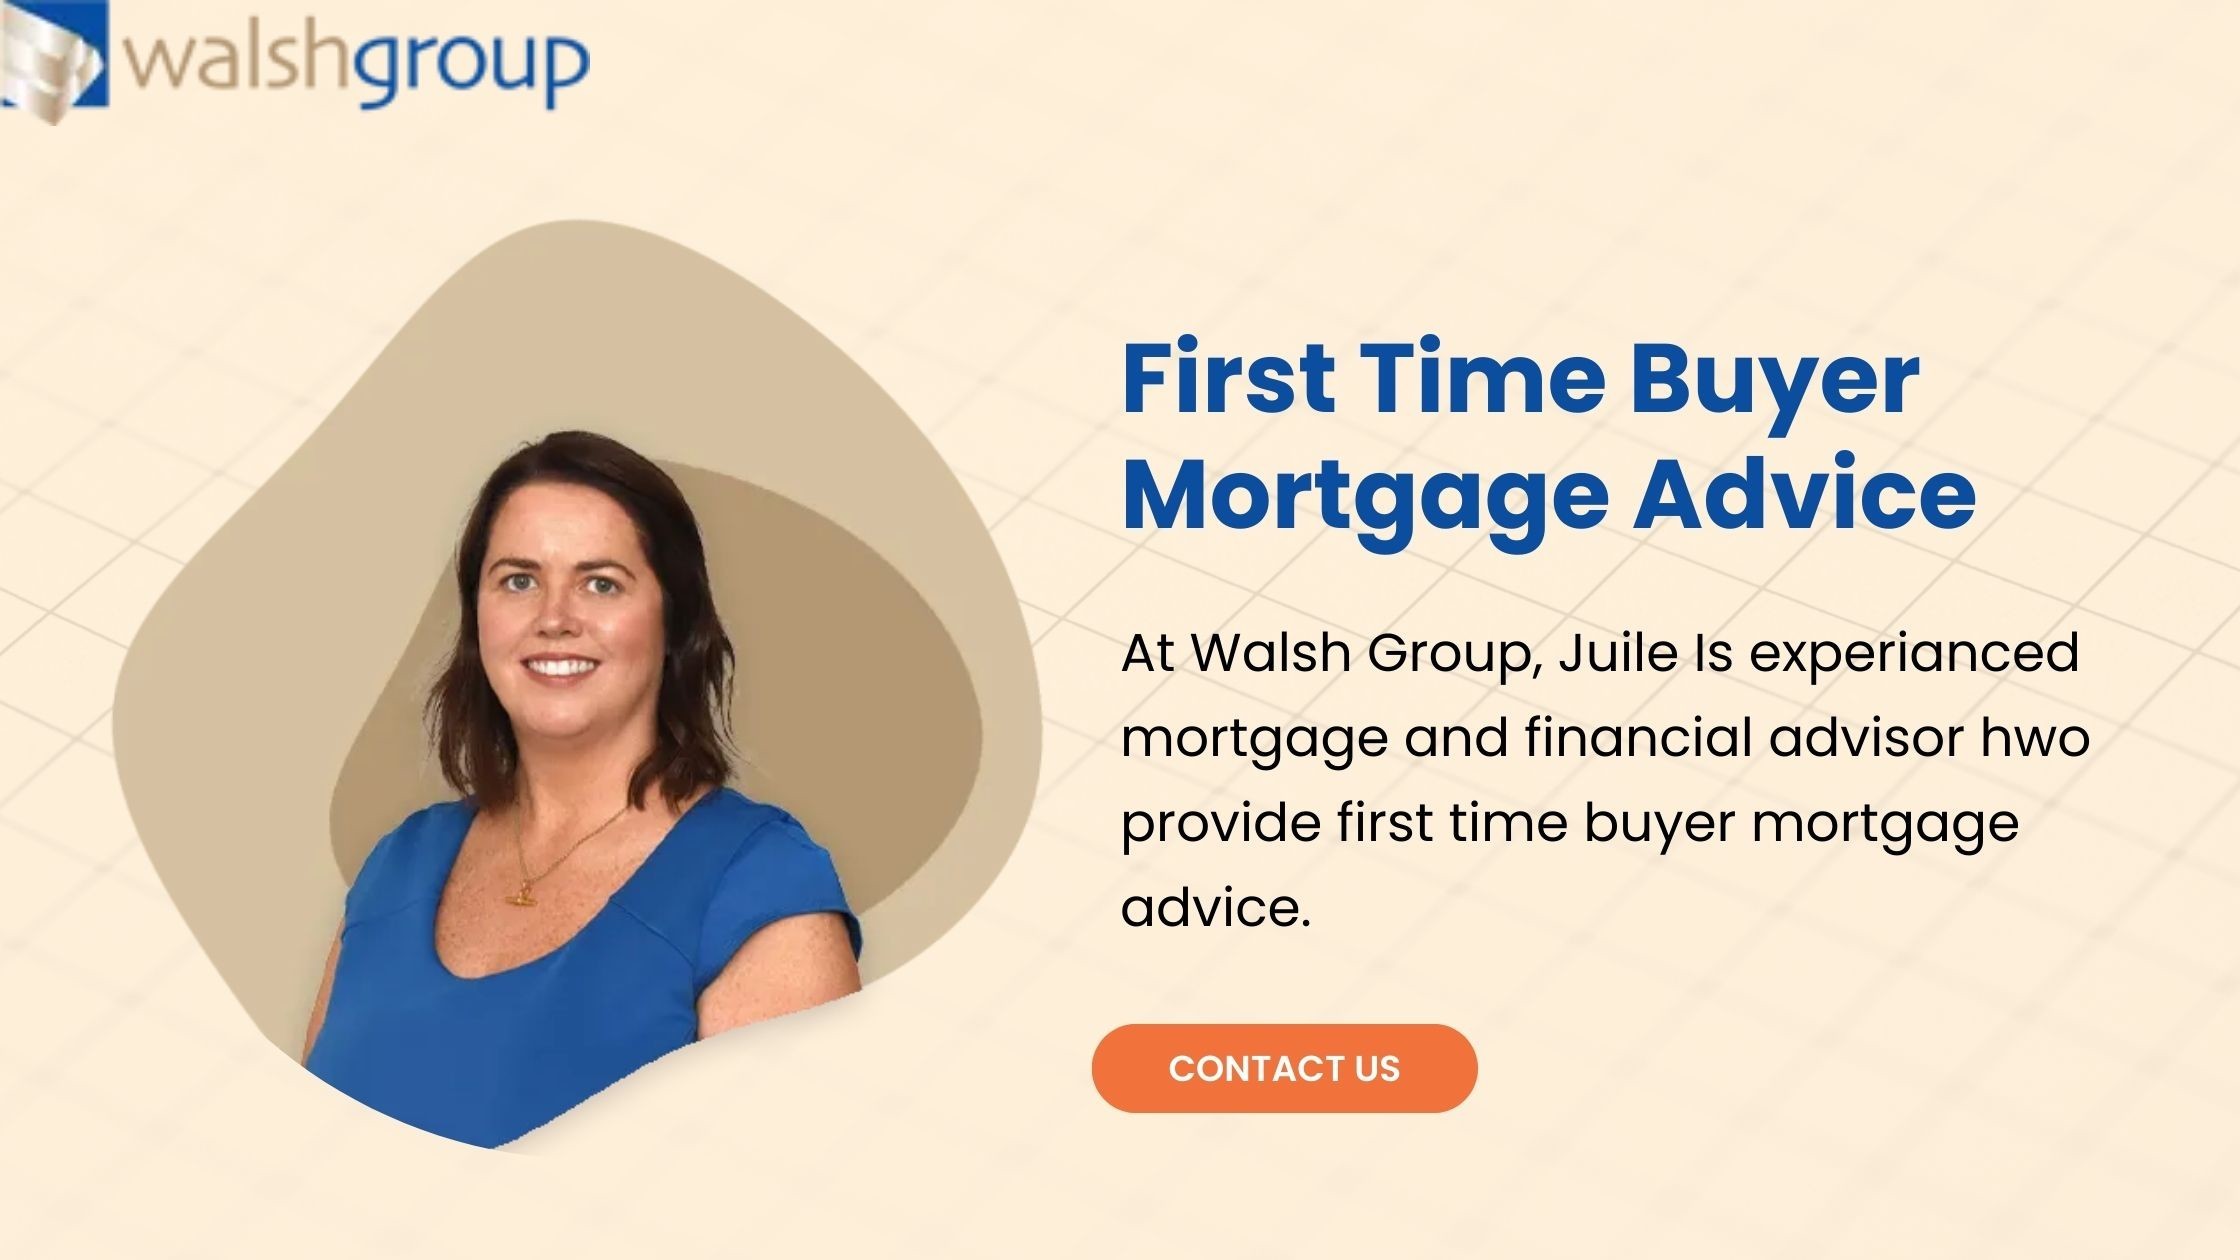 First Time Buyer Mortgage Advice